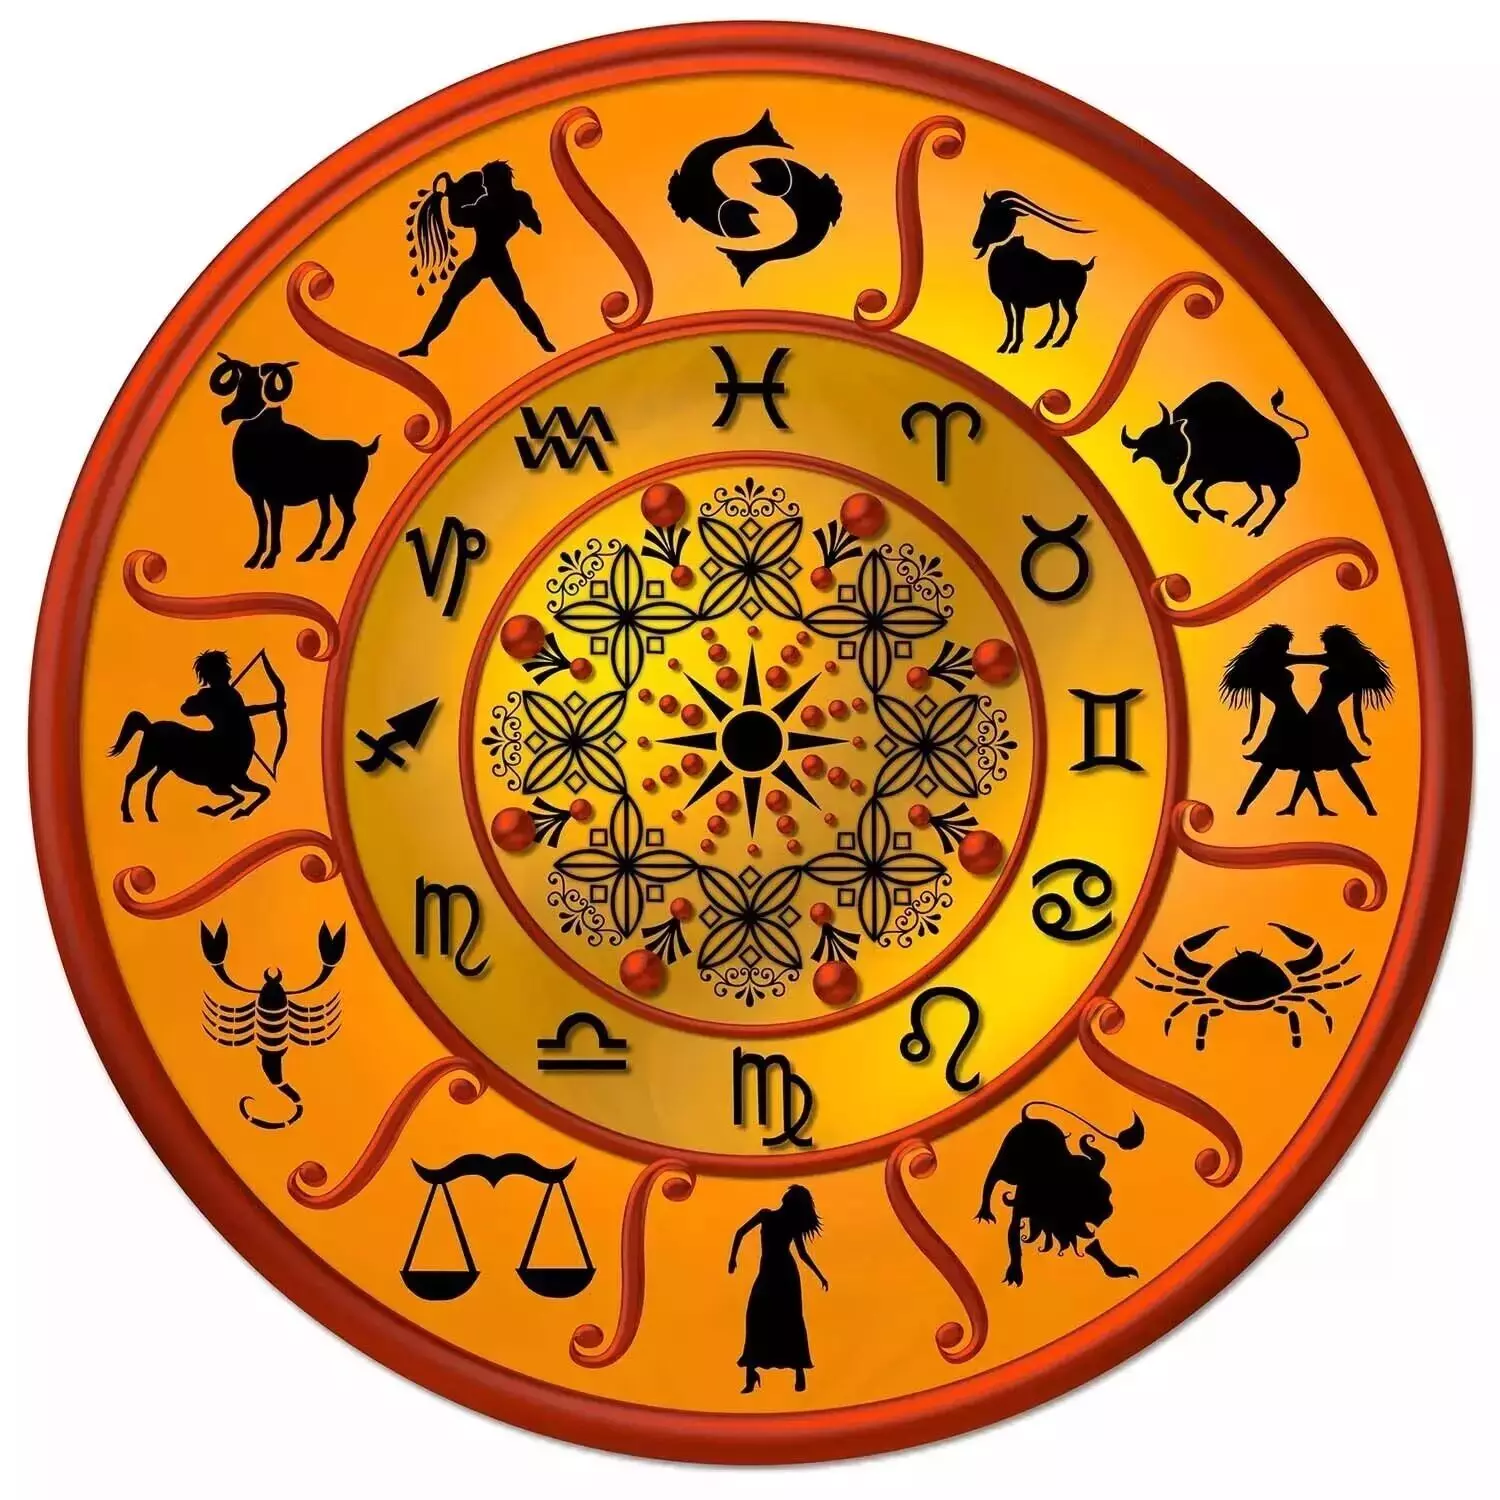 01 August  – Know your todays horoscope